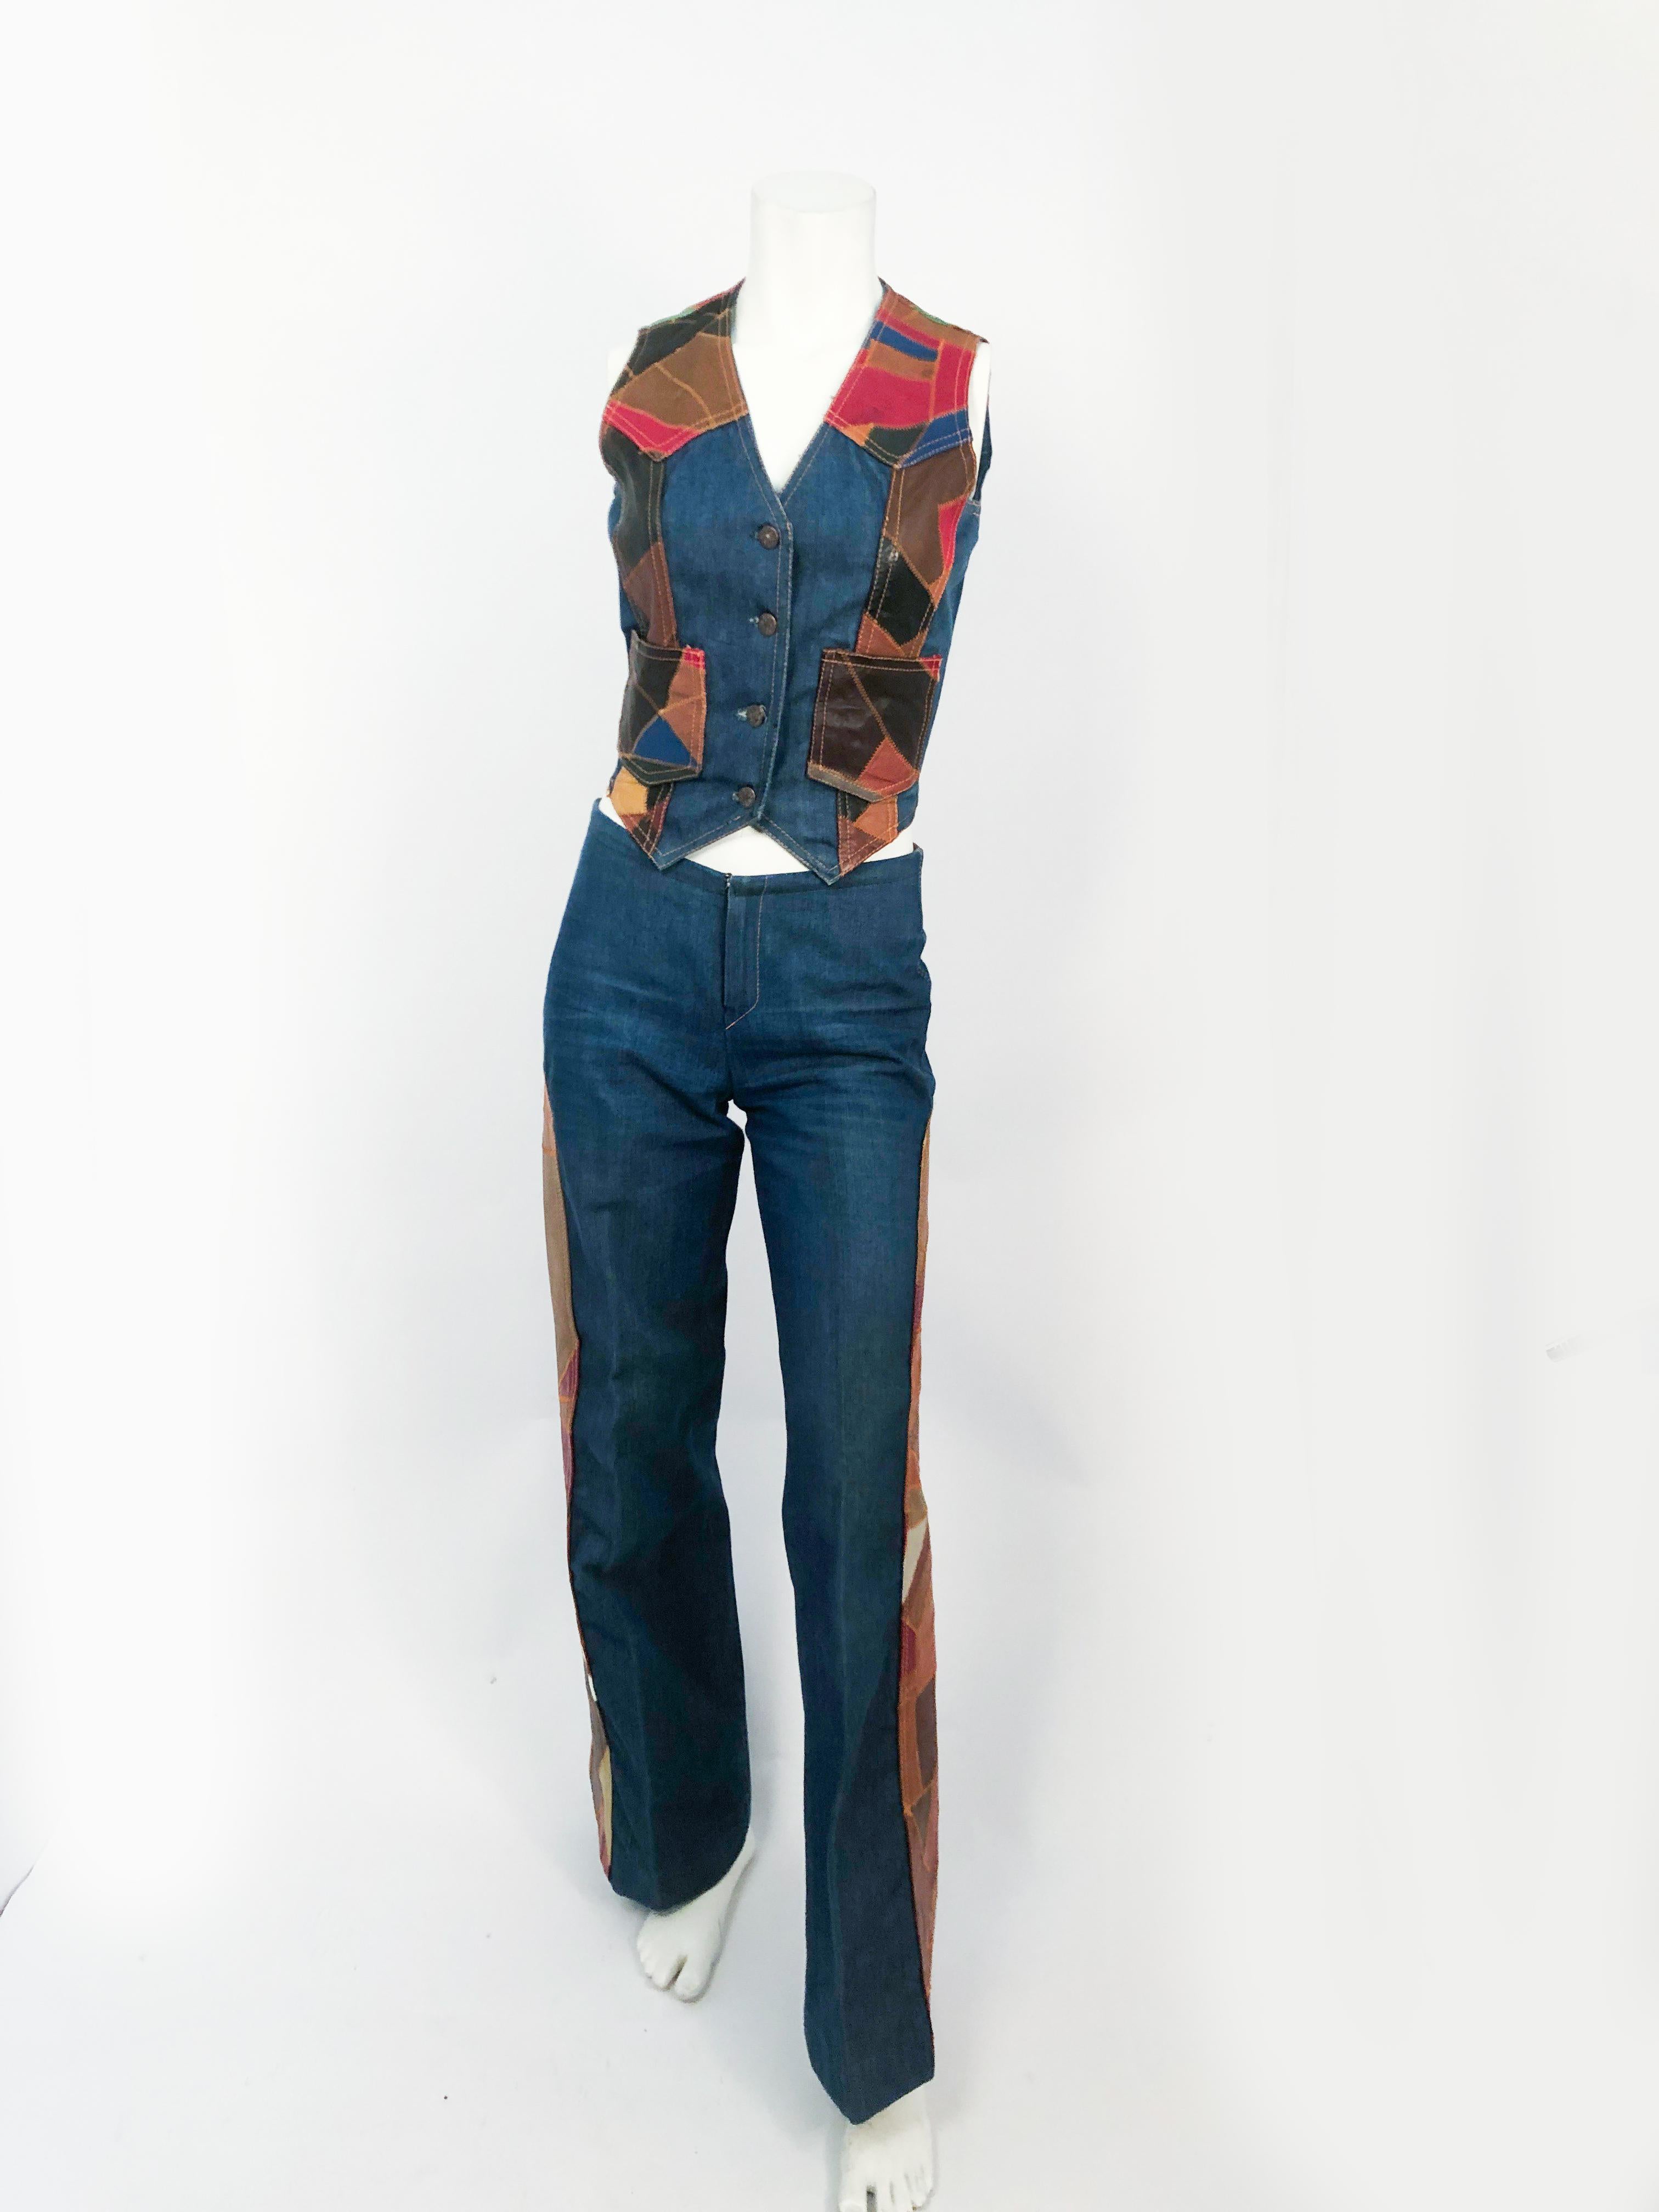 1970s Denim Set (vest and jeans) Featuring Multicolored Patch Work panels along the face of the vest and the side of the flared pant legs.